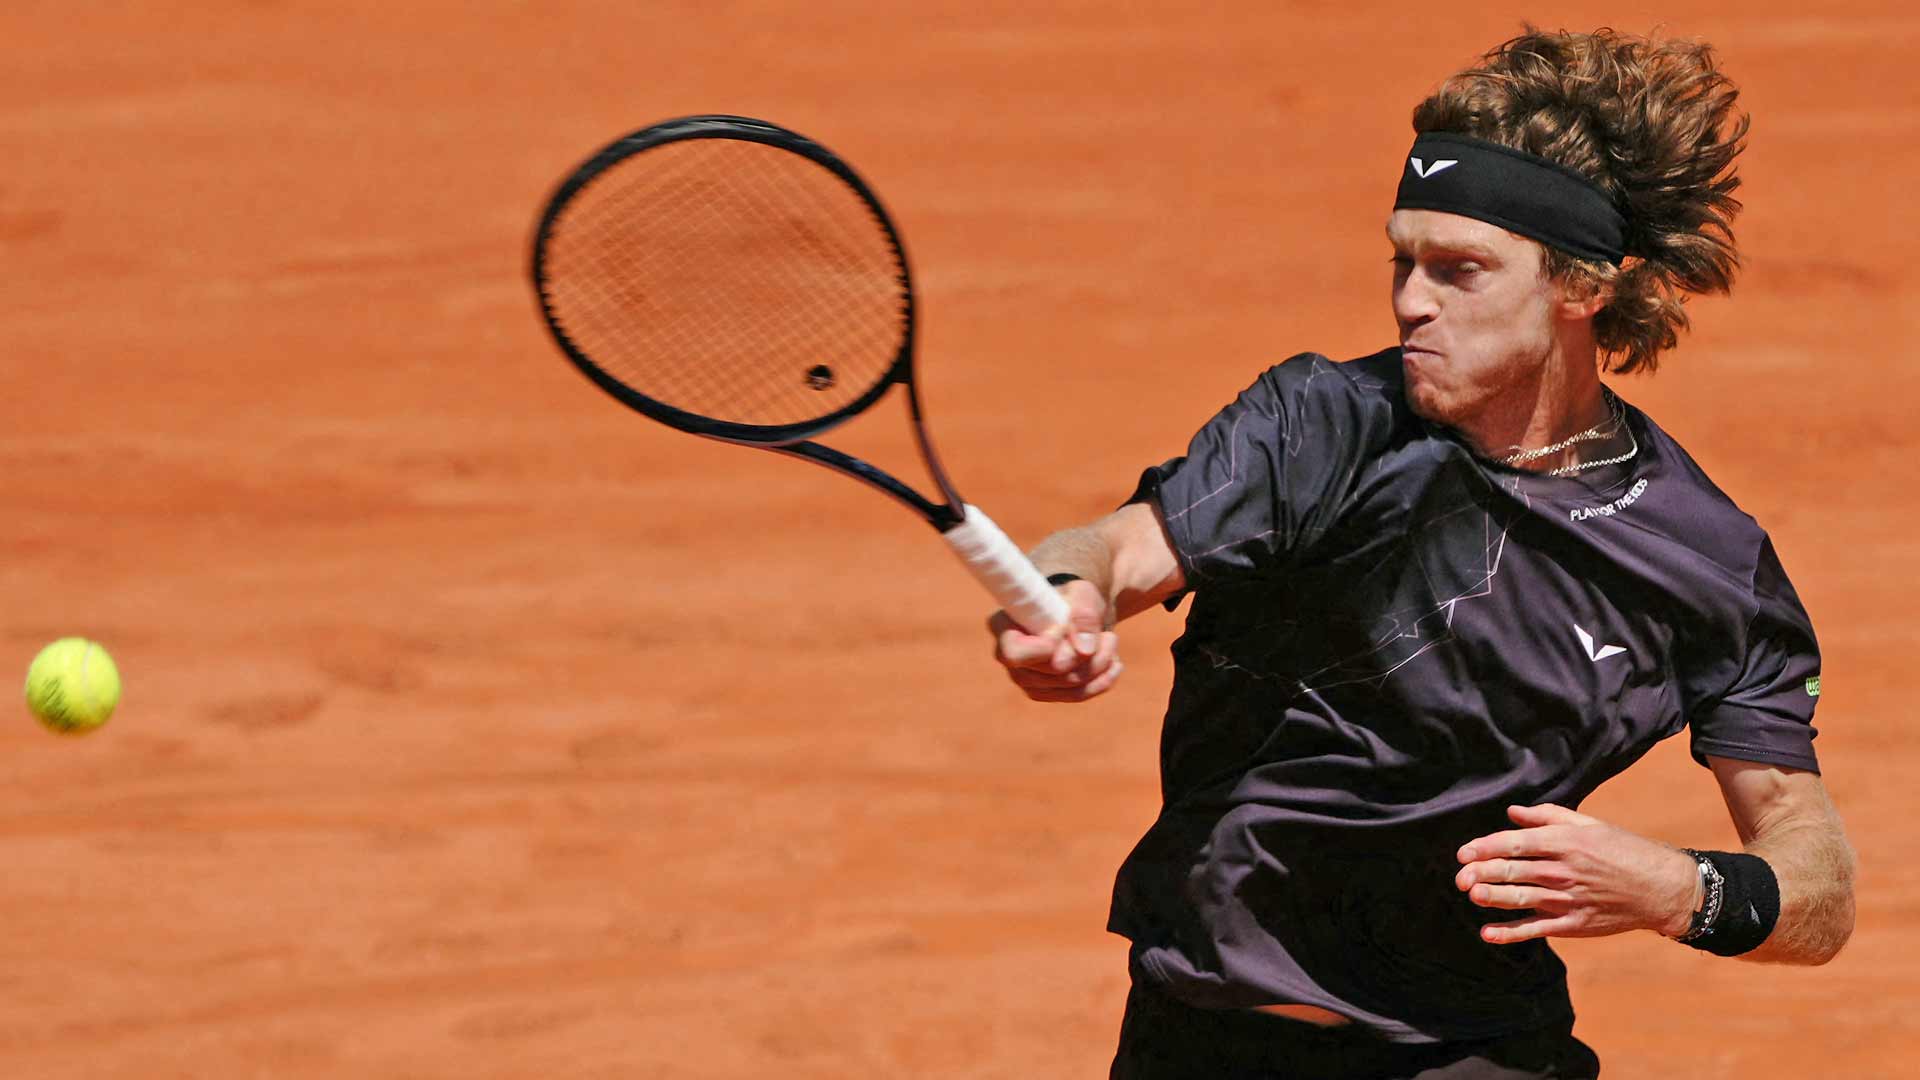 Andrey Rublev defeats Taro Daniel in four sets on Sunday at Roland Garros.